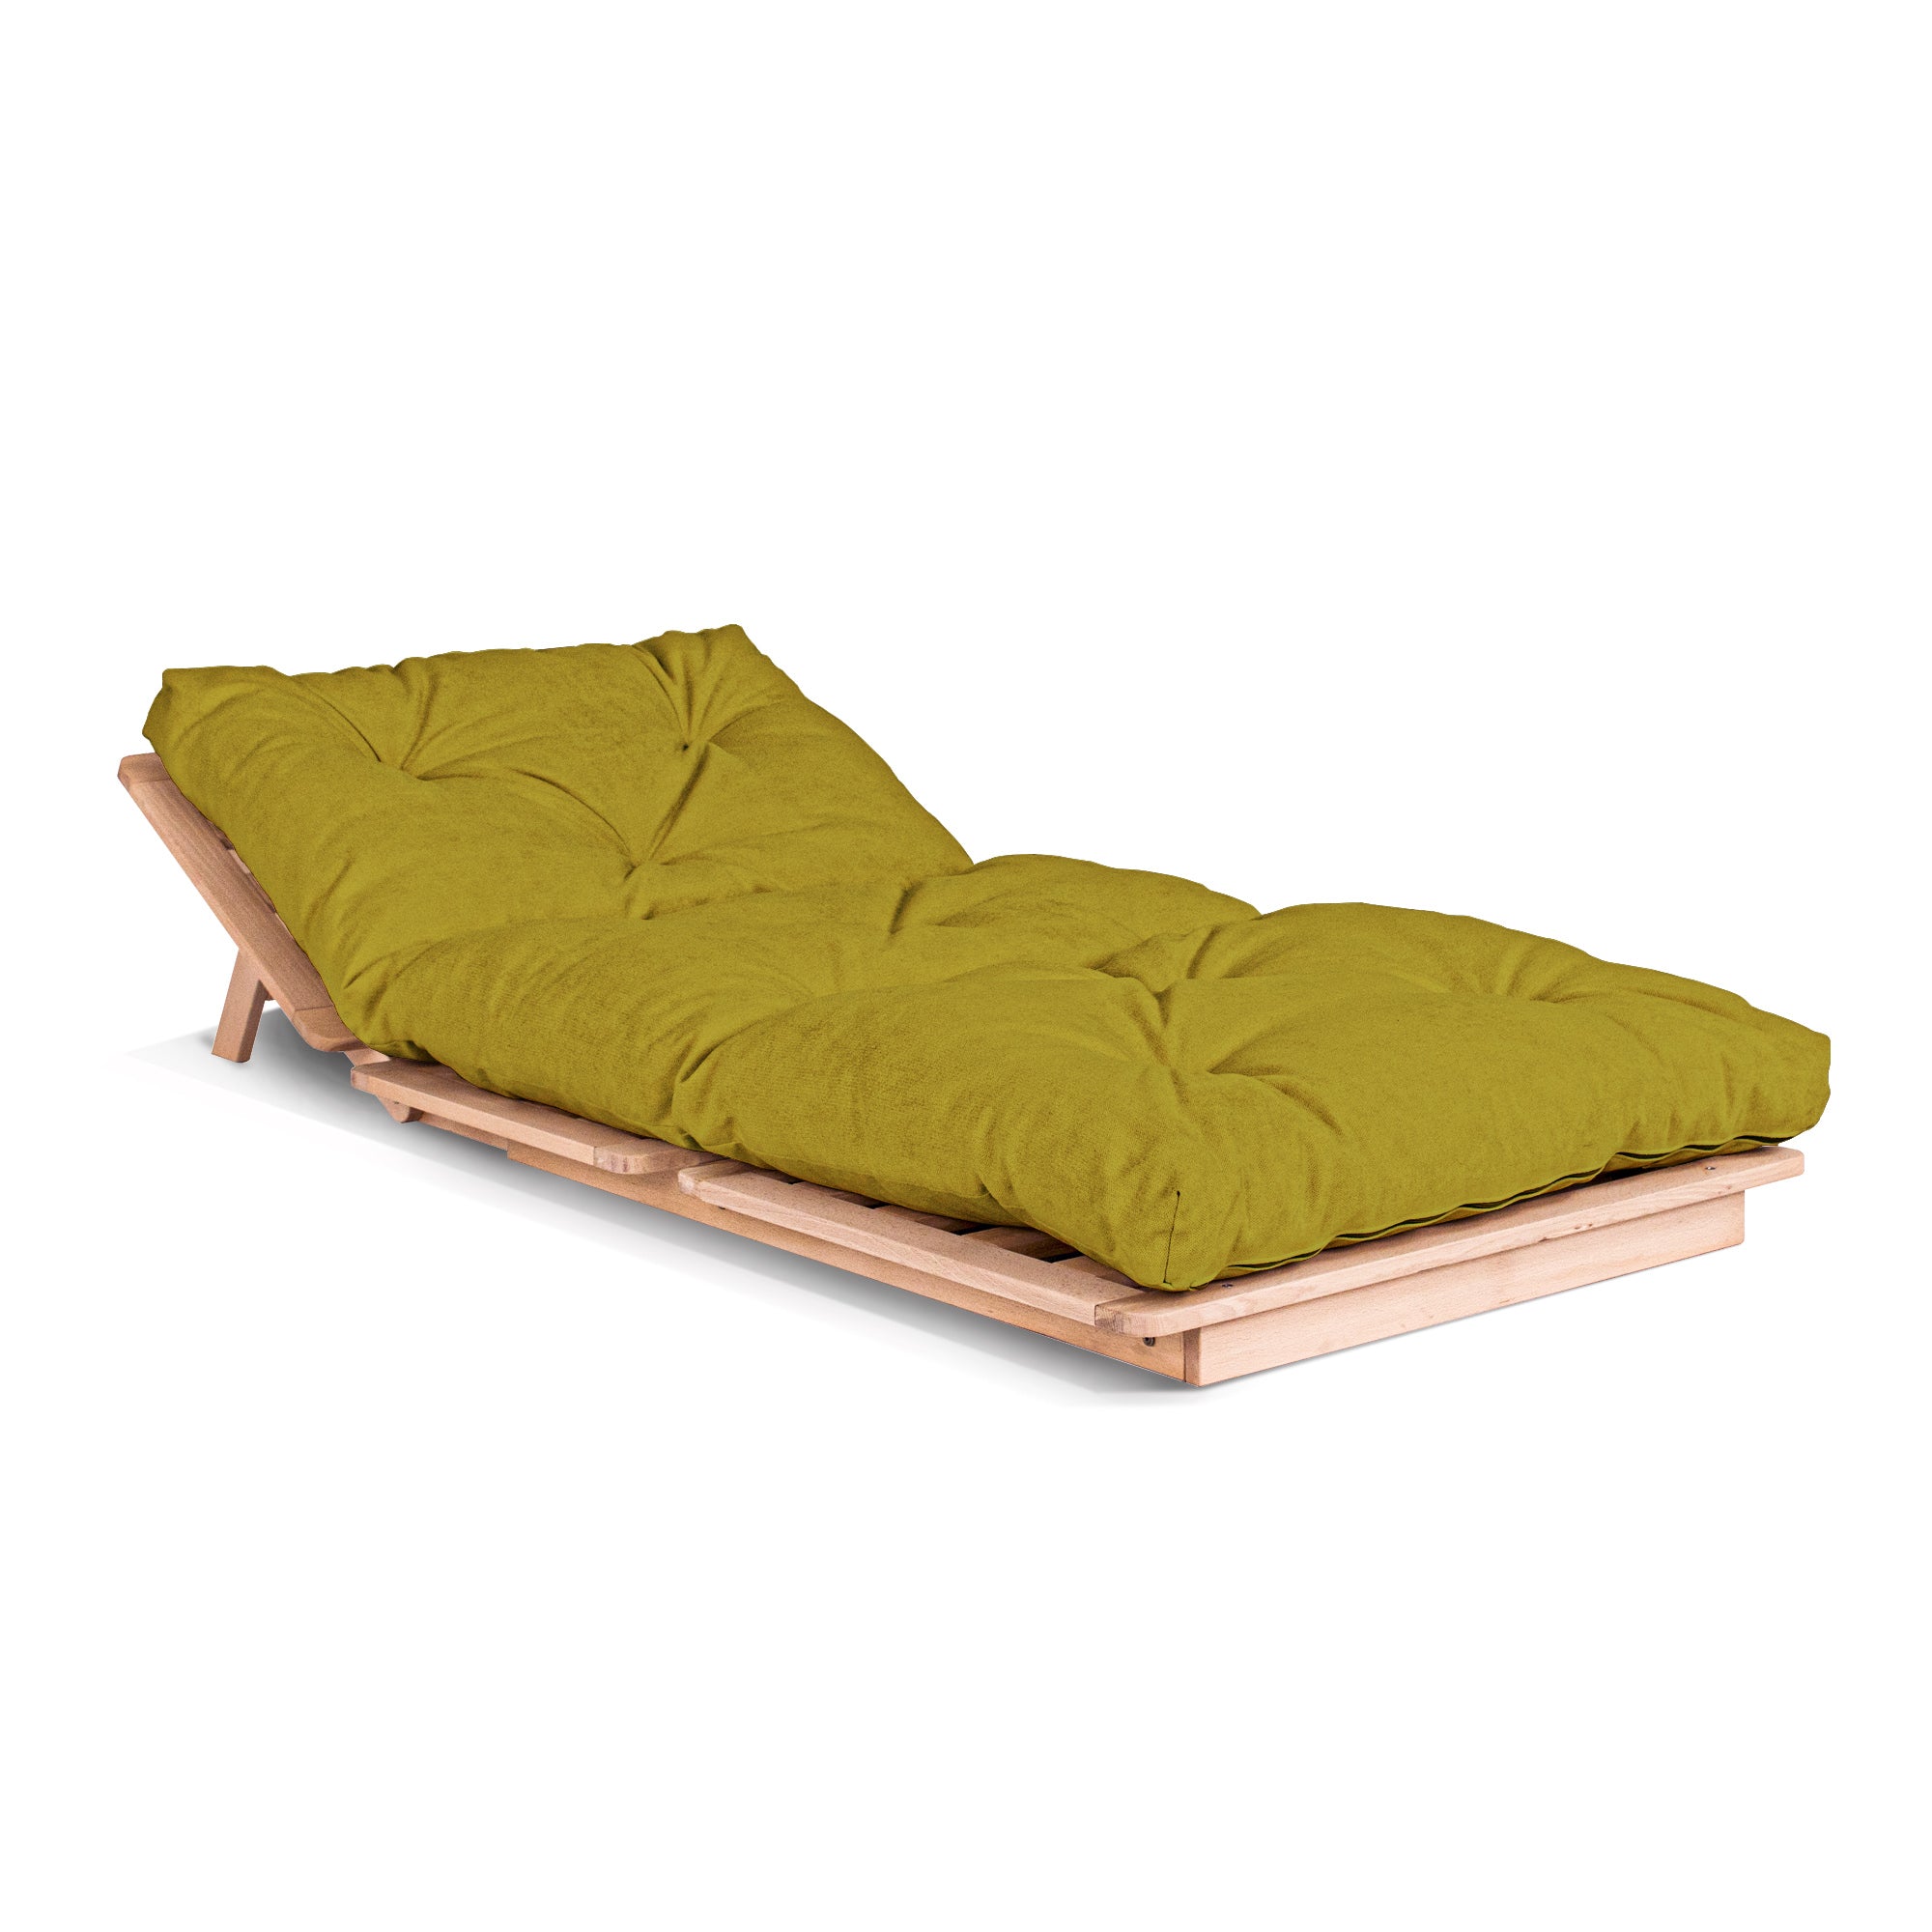 LAYTI-90 Single Futon Bed Chair, Solid Beech Wood, Natural